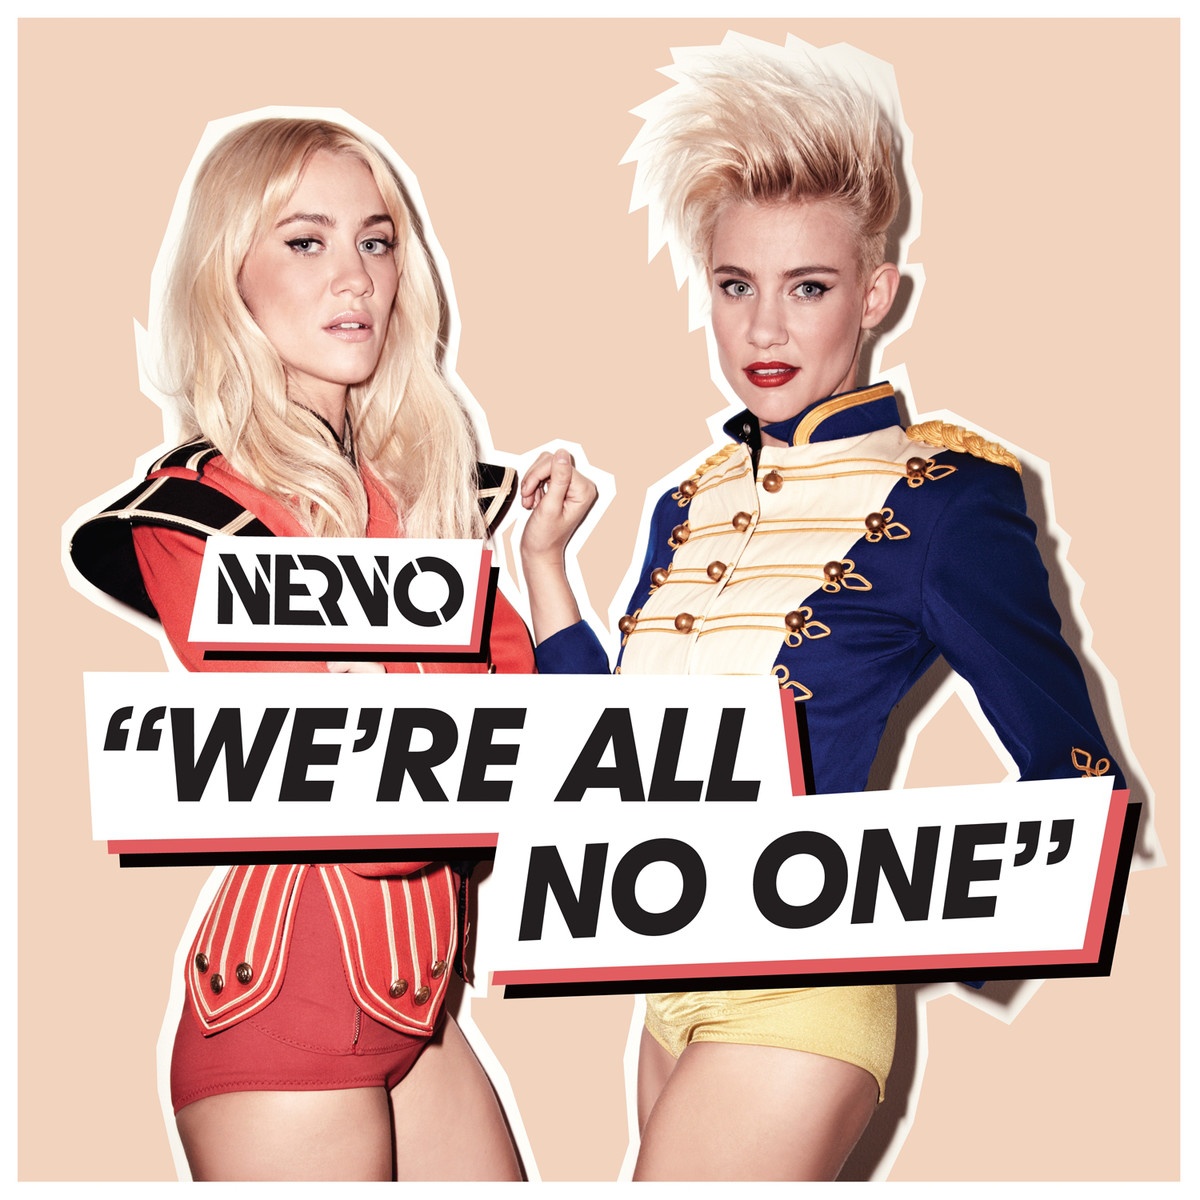 We're All No One (Original Mix) [feat. Afrojack and Steve Aoki]